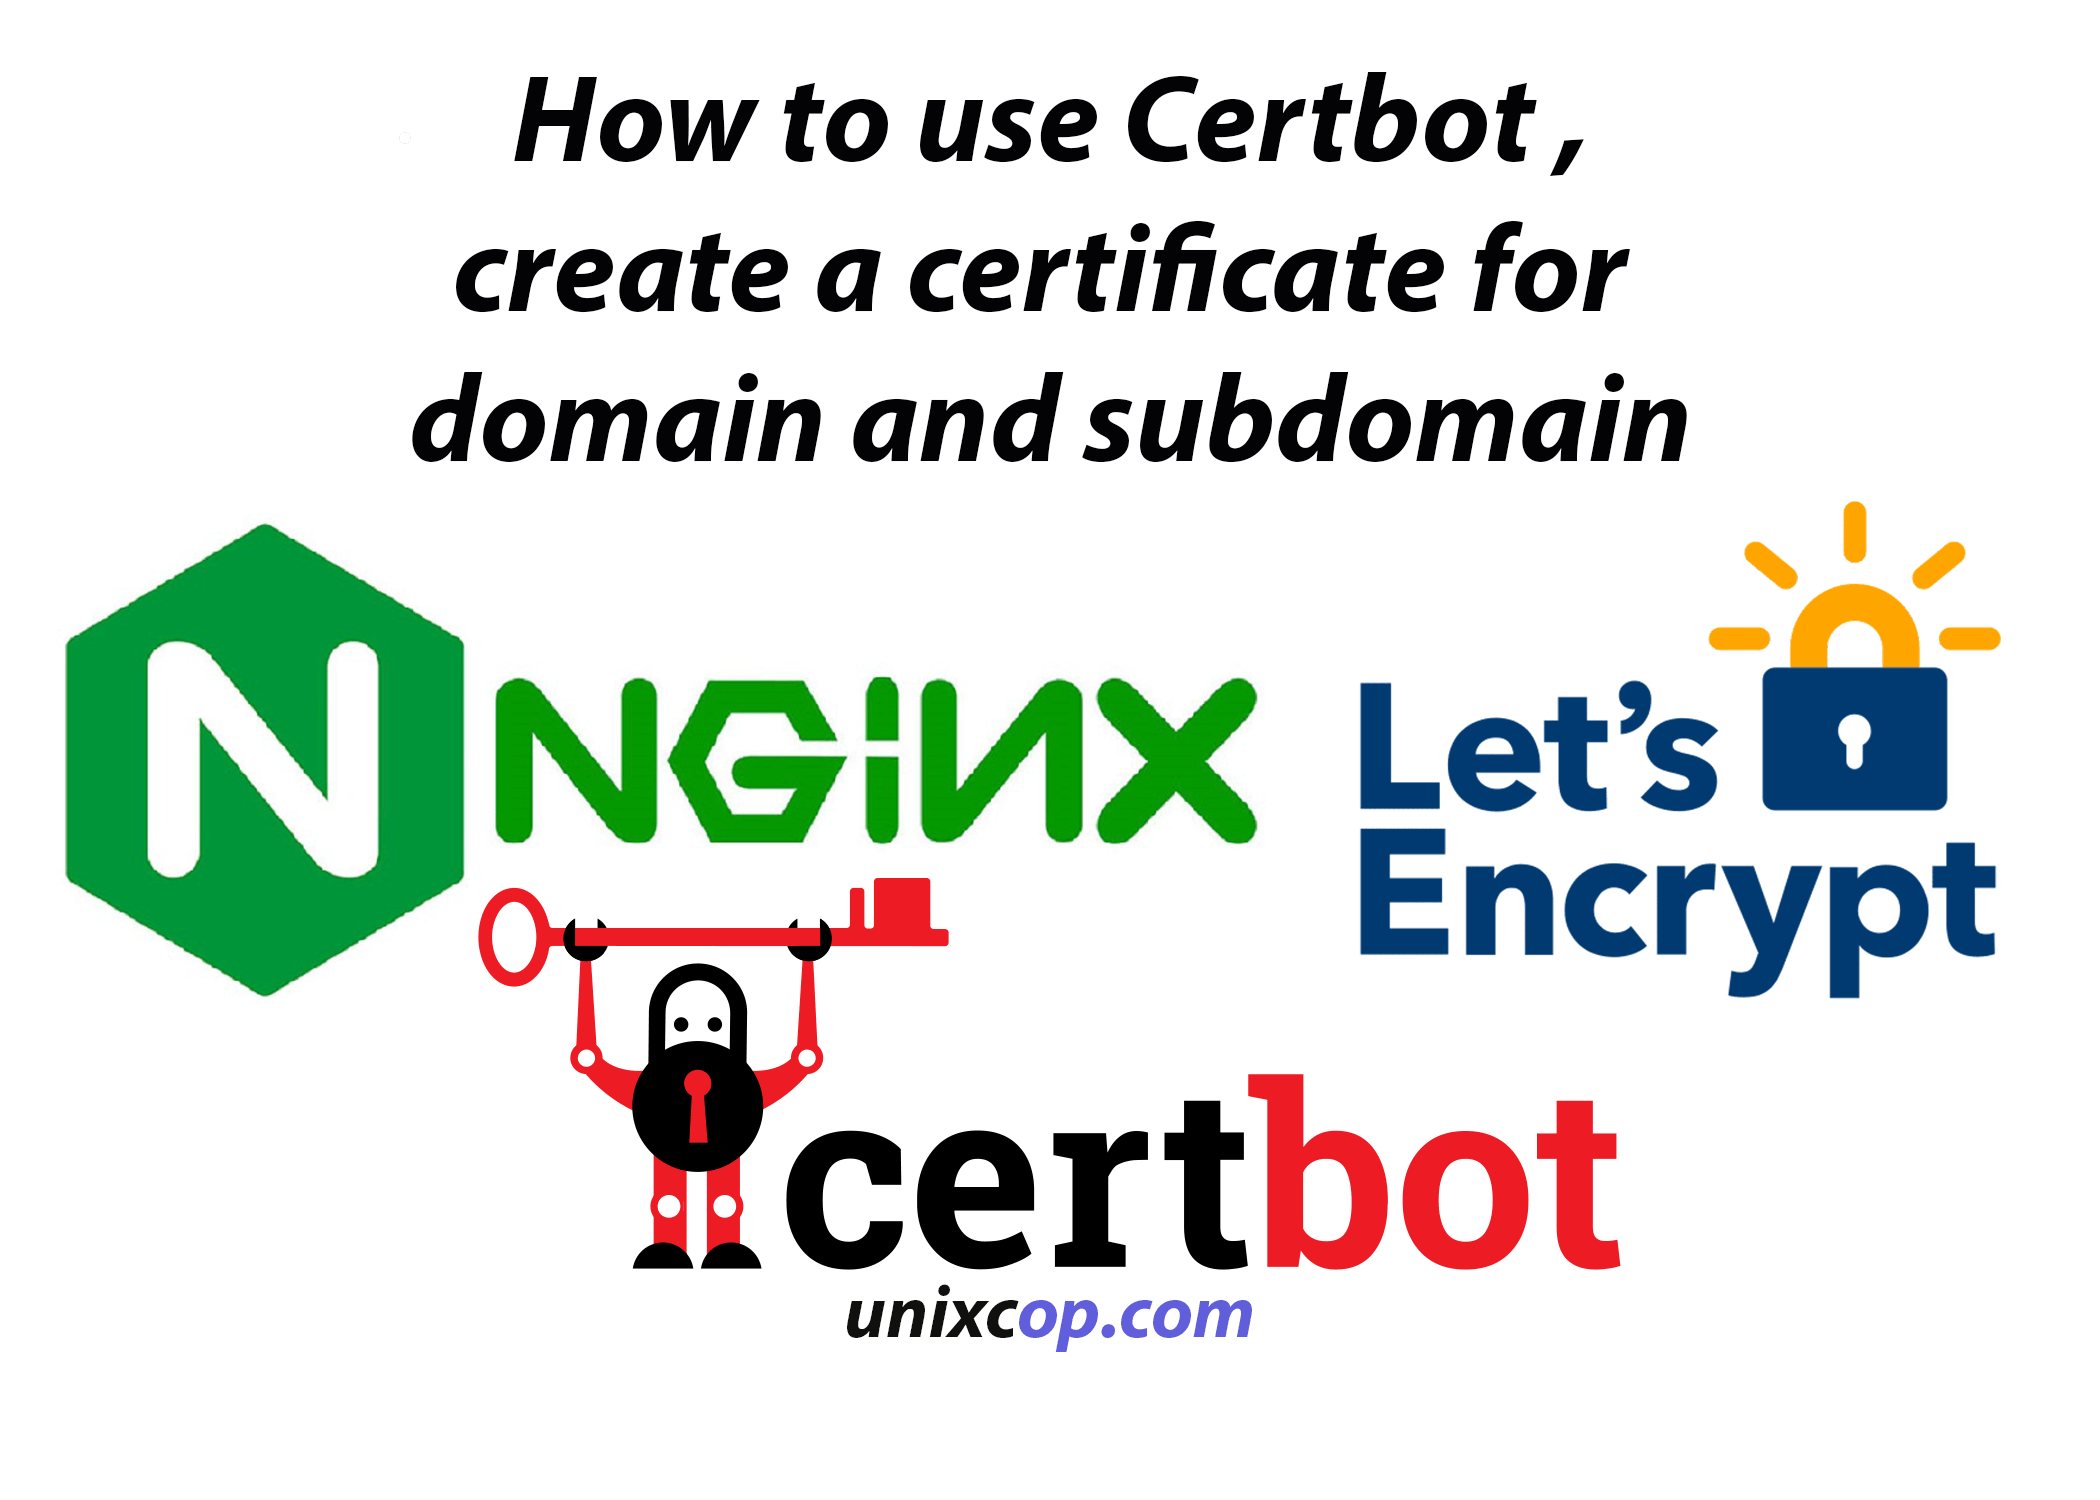 How to use Certbot, create a certificate for domain and submain